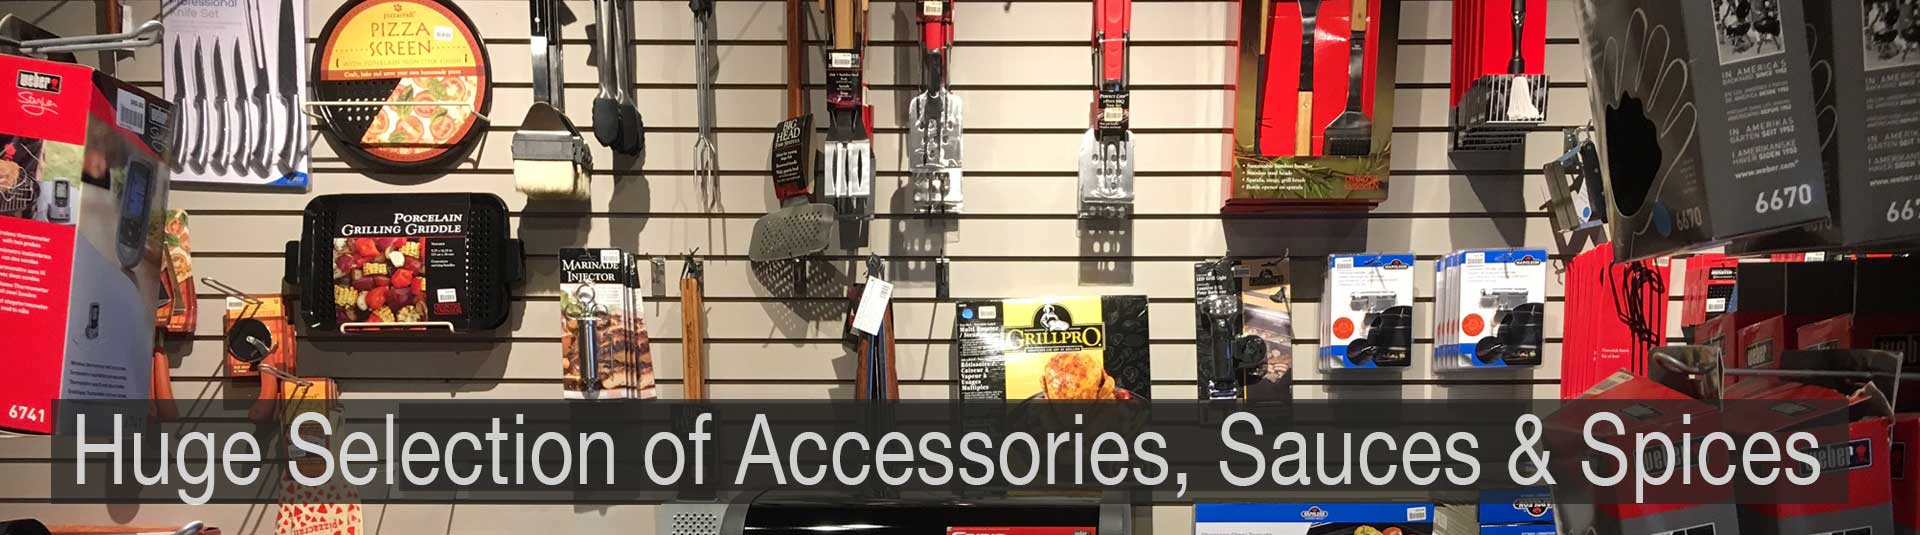 Huge Selection of BBQ Grill Accessories, i.e. tools, pellets, chips, sauces and spices, at your BBQ Grill Headquarters, Benson Stone Company